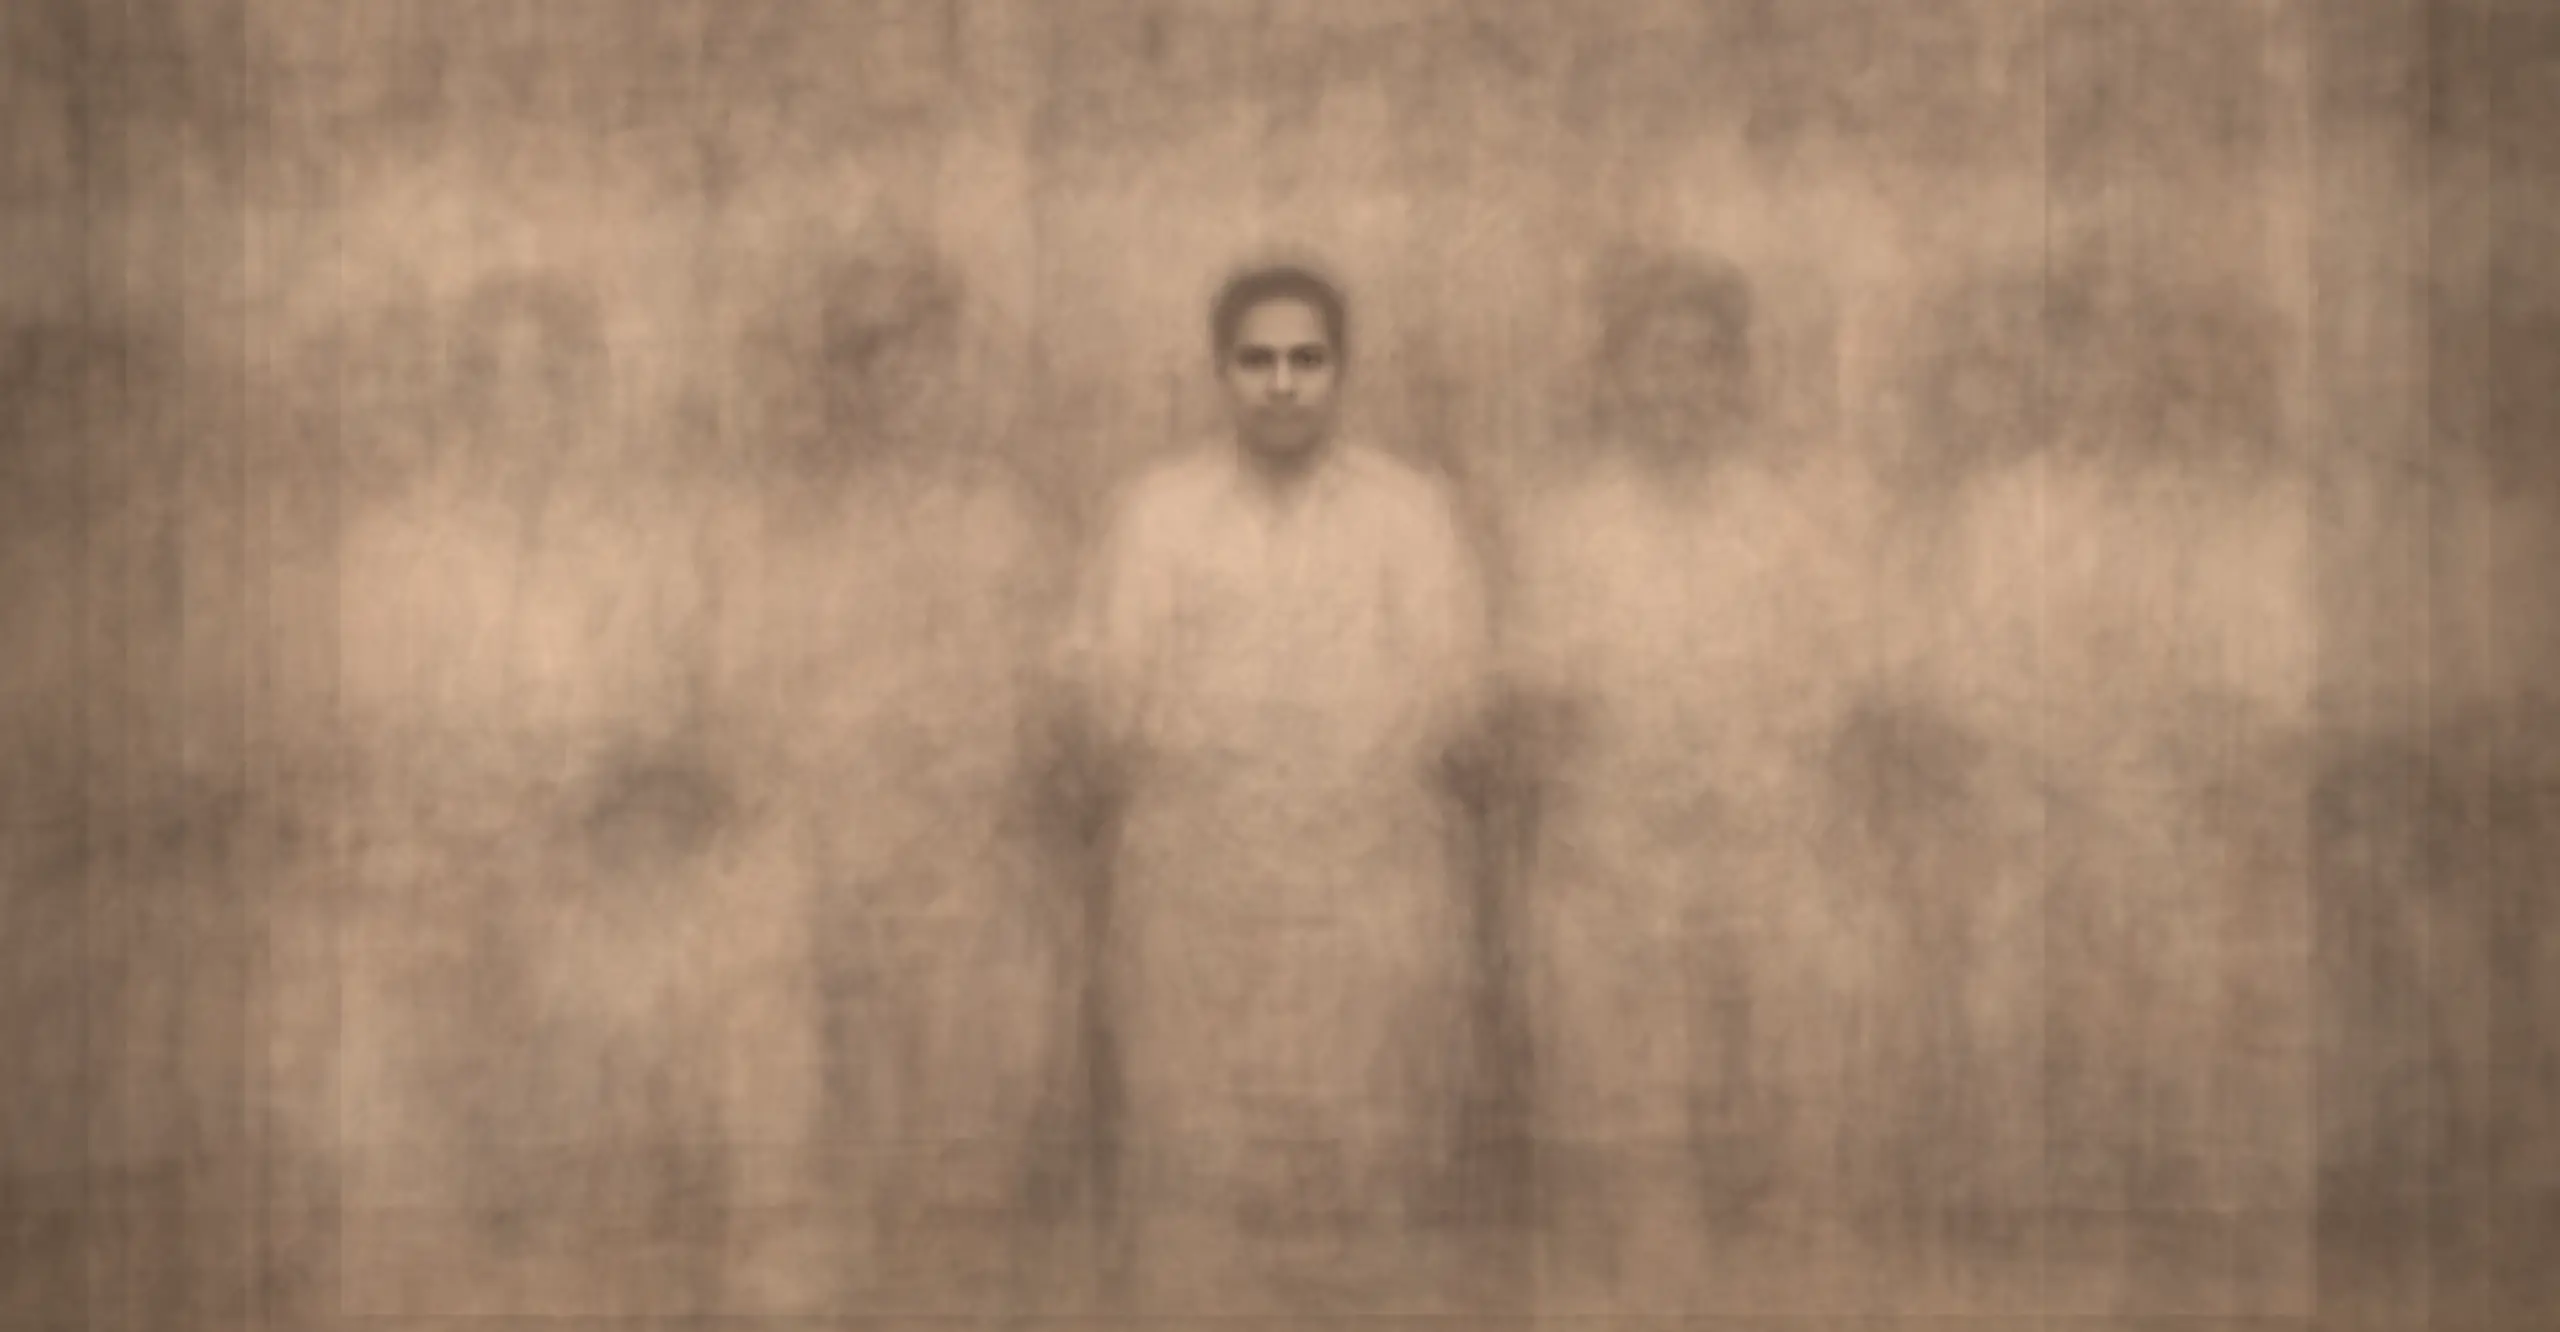 A composite of several sepia close-up photographs of a group of people posing in a South Asian photo studio. The image is ghostly other than the person in the centre's face.